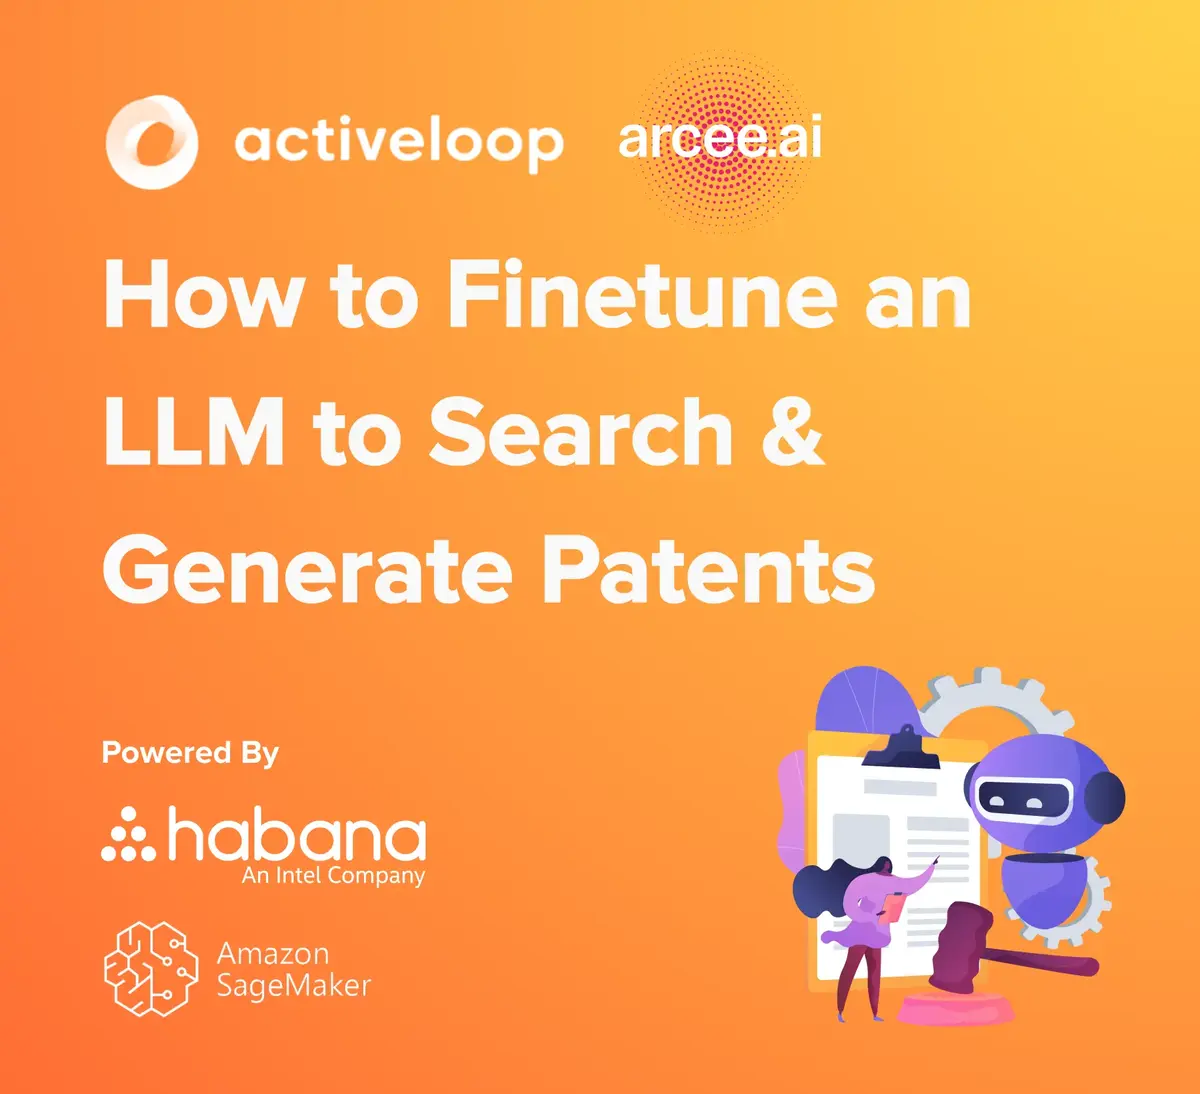 We Fine-Tuned LLMs on 8M Patents and Used AI Agents to Search and Write New Ones